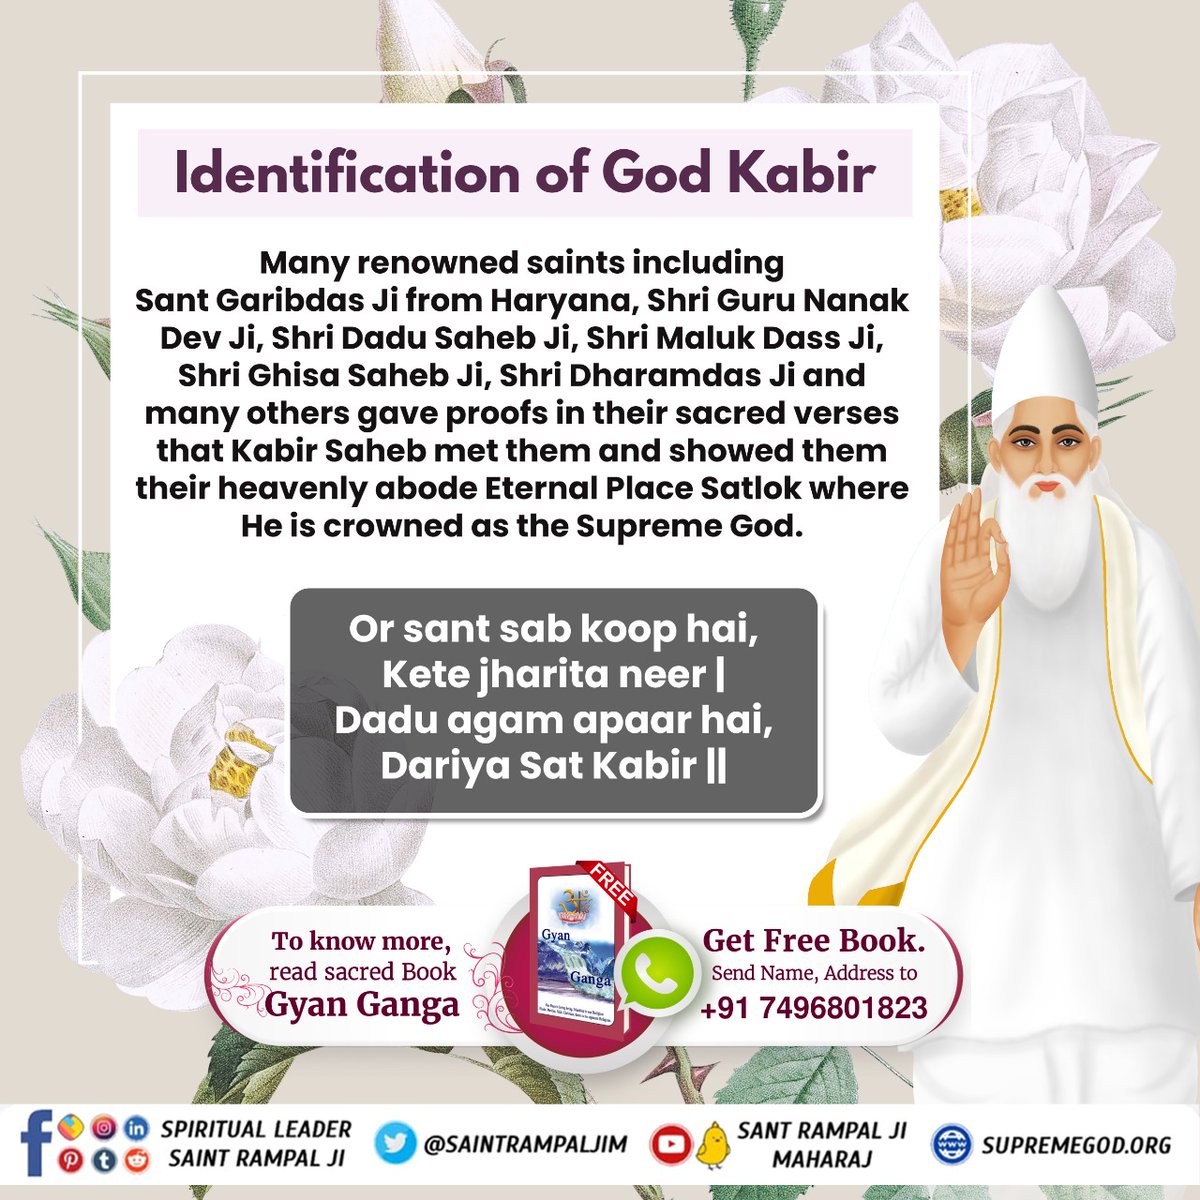 #GodKabir_Comes_In_All_4Yugas
Destroyer of Sins
Holy Yajurveda chapter 8 verse 13 and chapter 5 verse 32 that Supreme Almighty Kabir Sahib is the destroyer of the sin and can destroy any sin of His devotee..
To know more, read sacred Book
Gyan Ganga
#GodMorningFriday